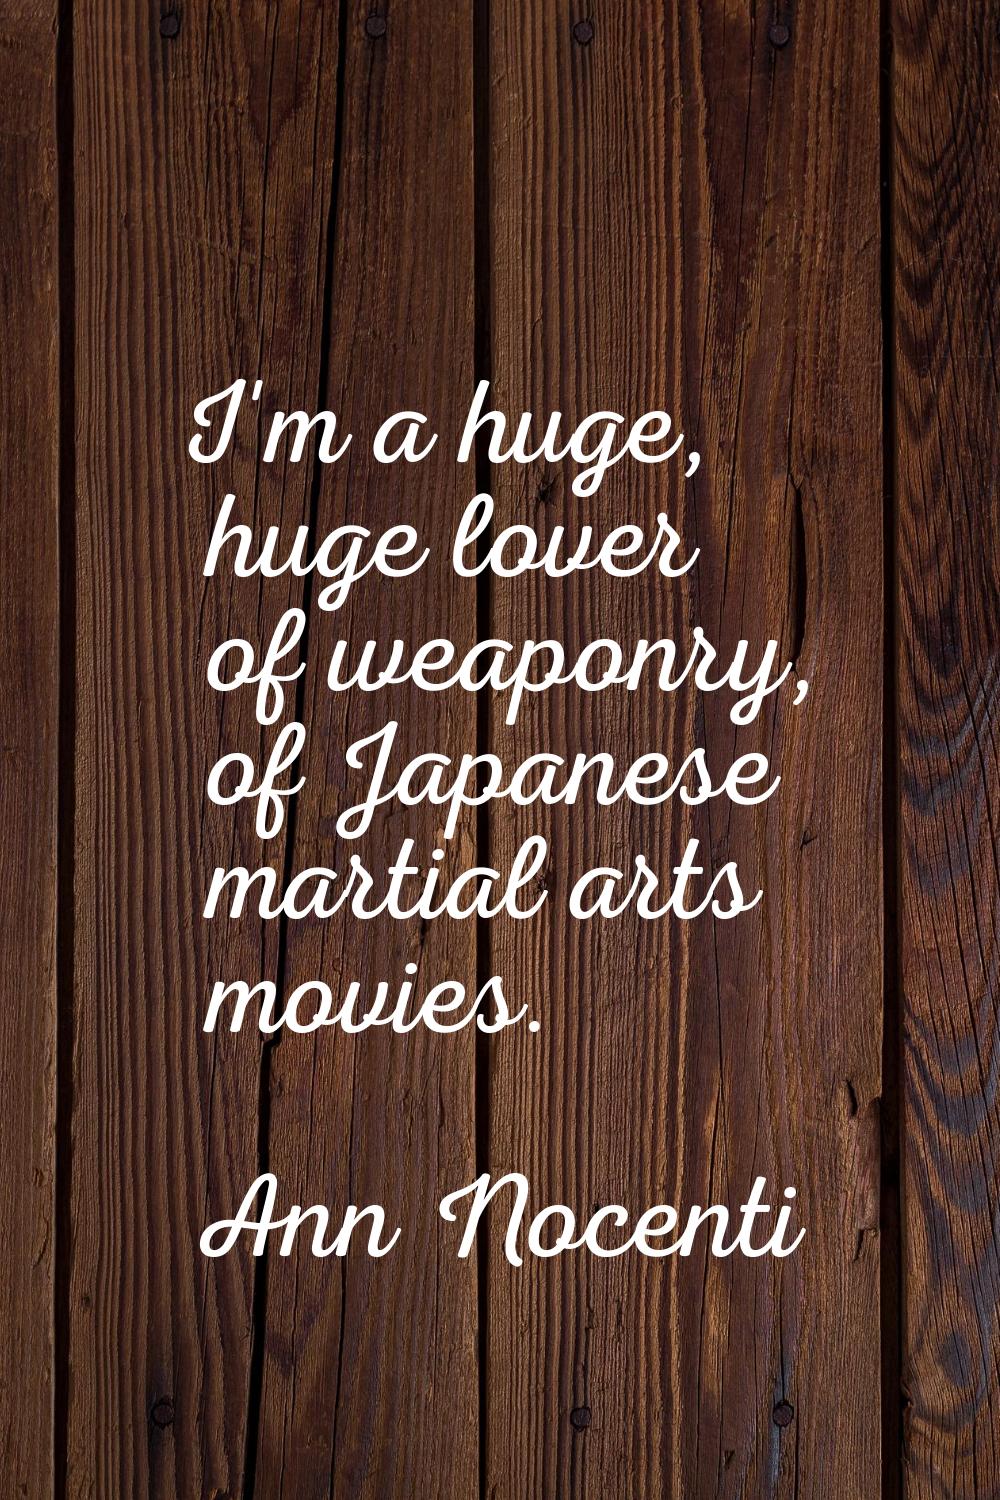 I'm a huge, huge lover of weaponry, of Japanese martial arts movies.